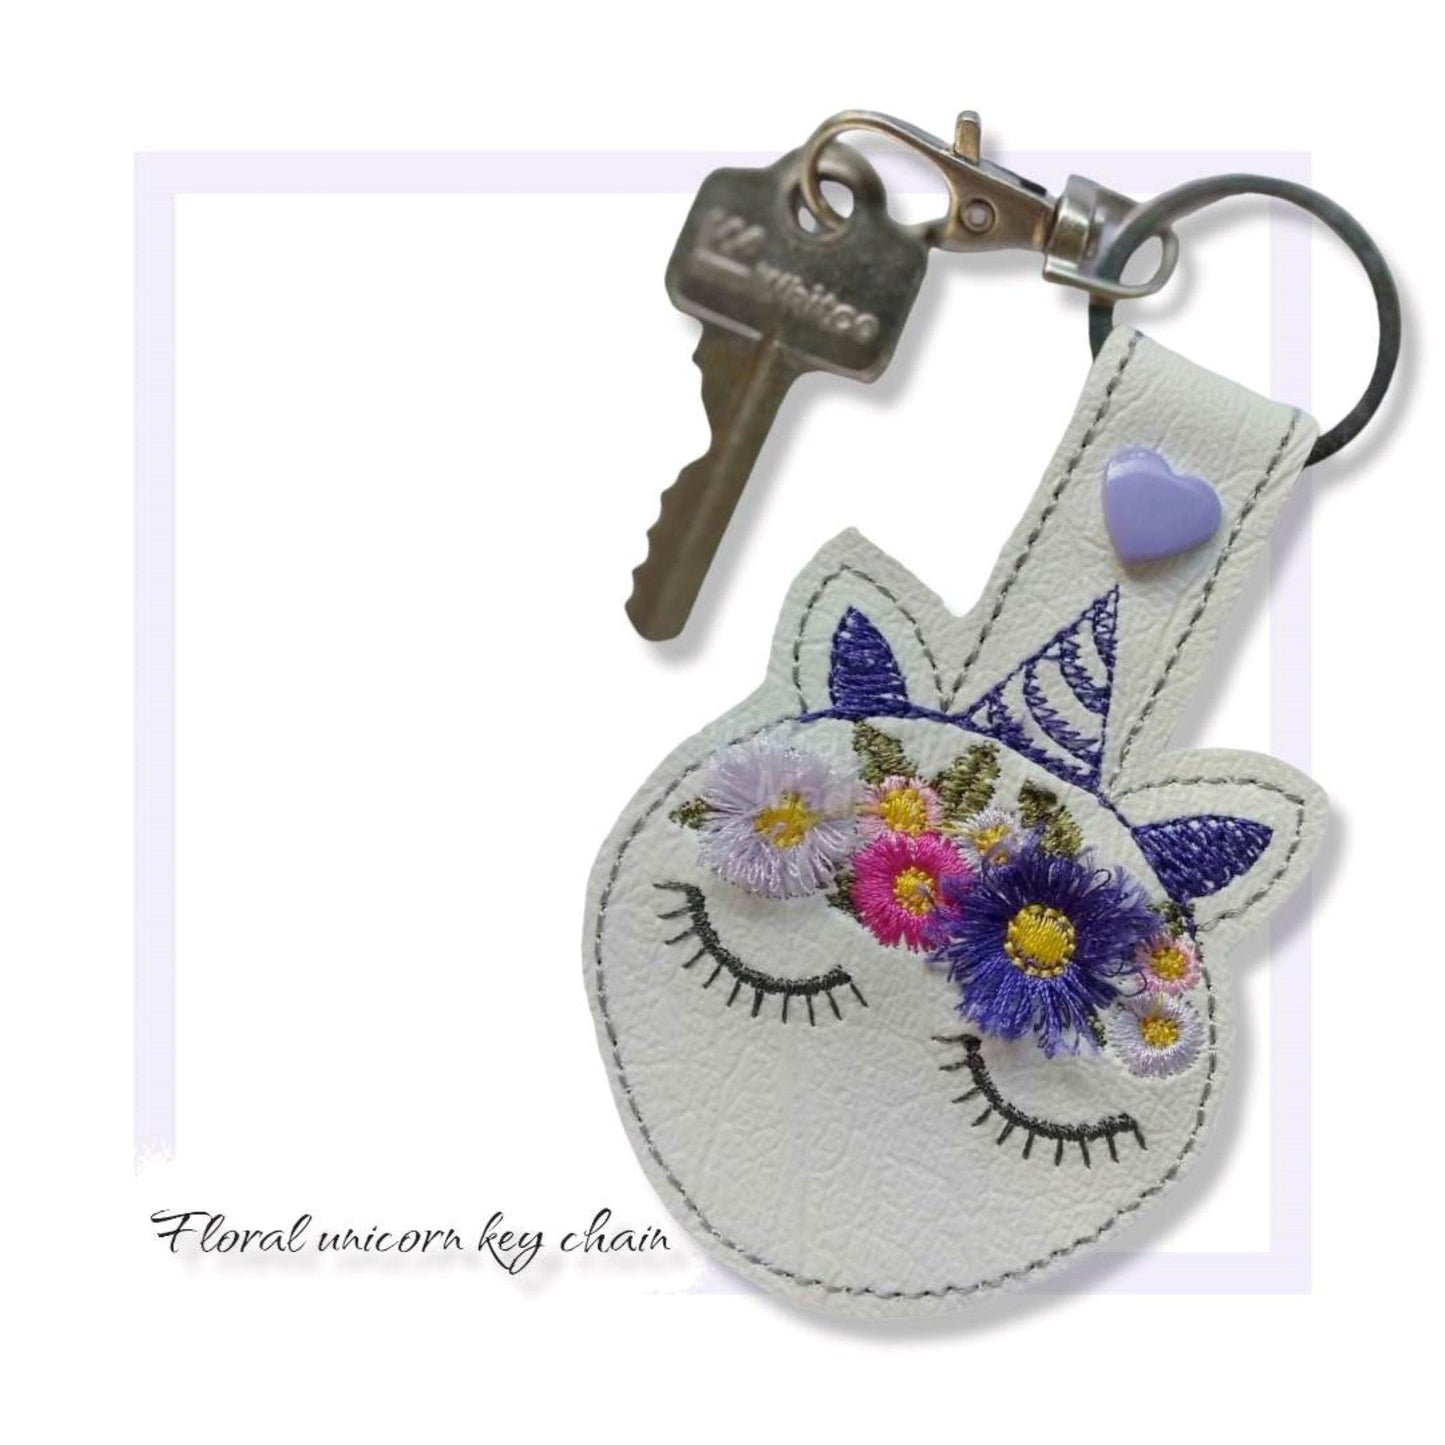 Unicorn key fob with pink and purple fringed flowers, cute gift, Australian made - Lil-aiges Creations - Quality Australian-made Gifts